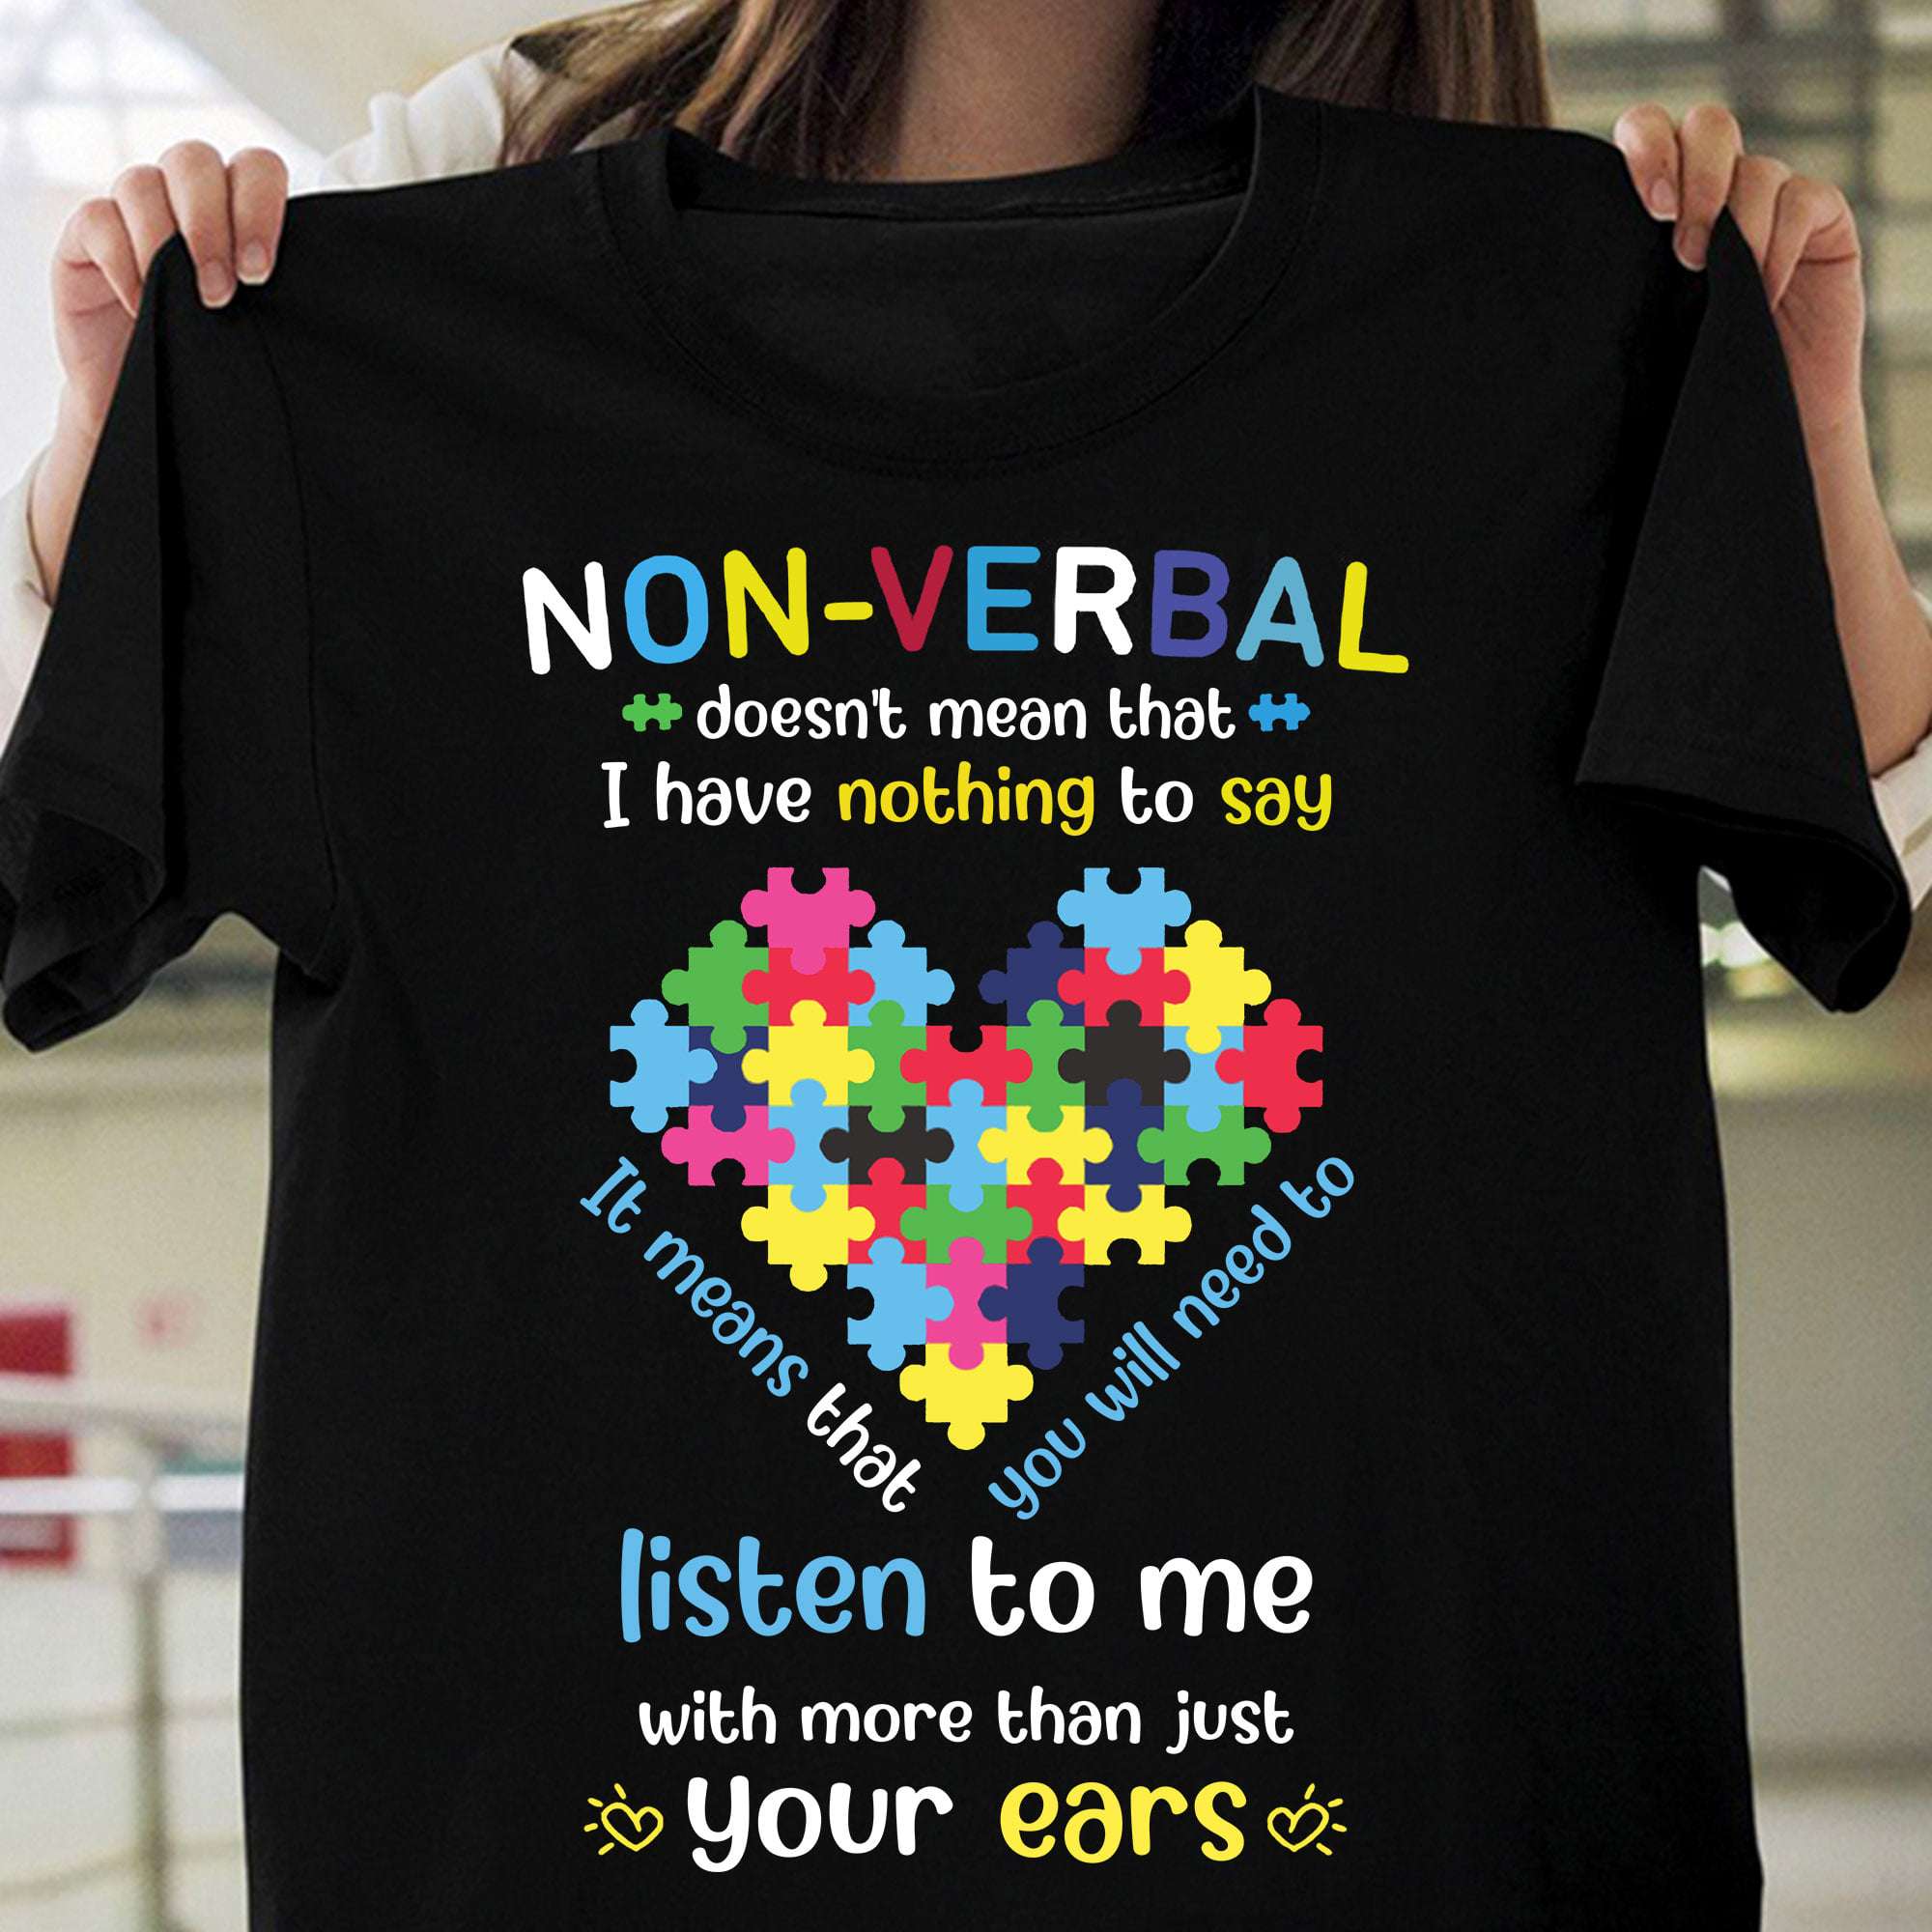 Non-verbal doesn't mean that I have nothing to say it means that you will need to listen to me - Autism awareness, autism puzzle heart